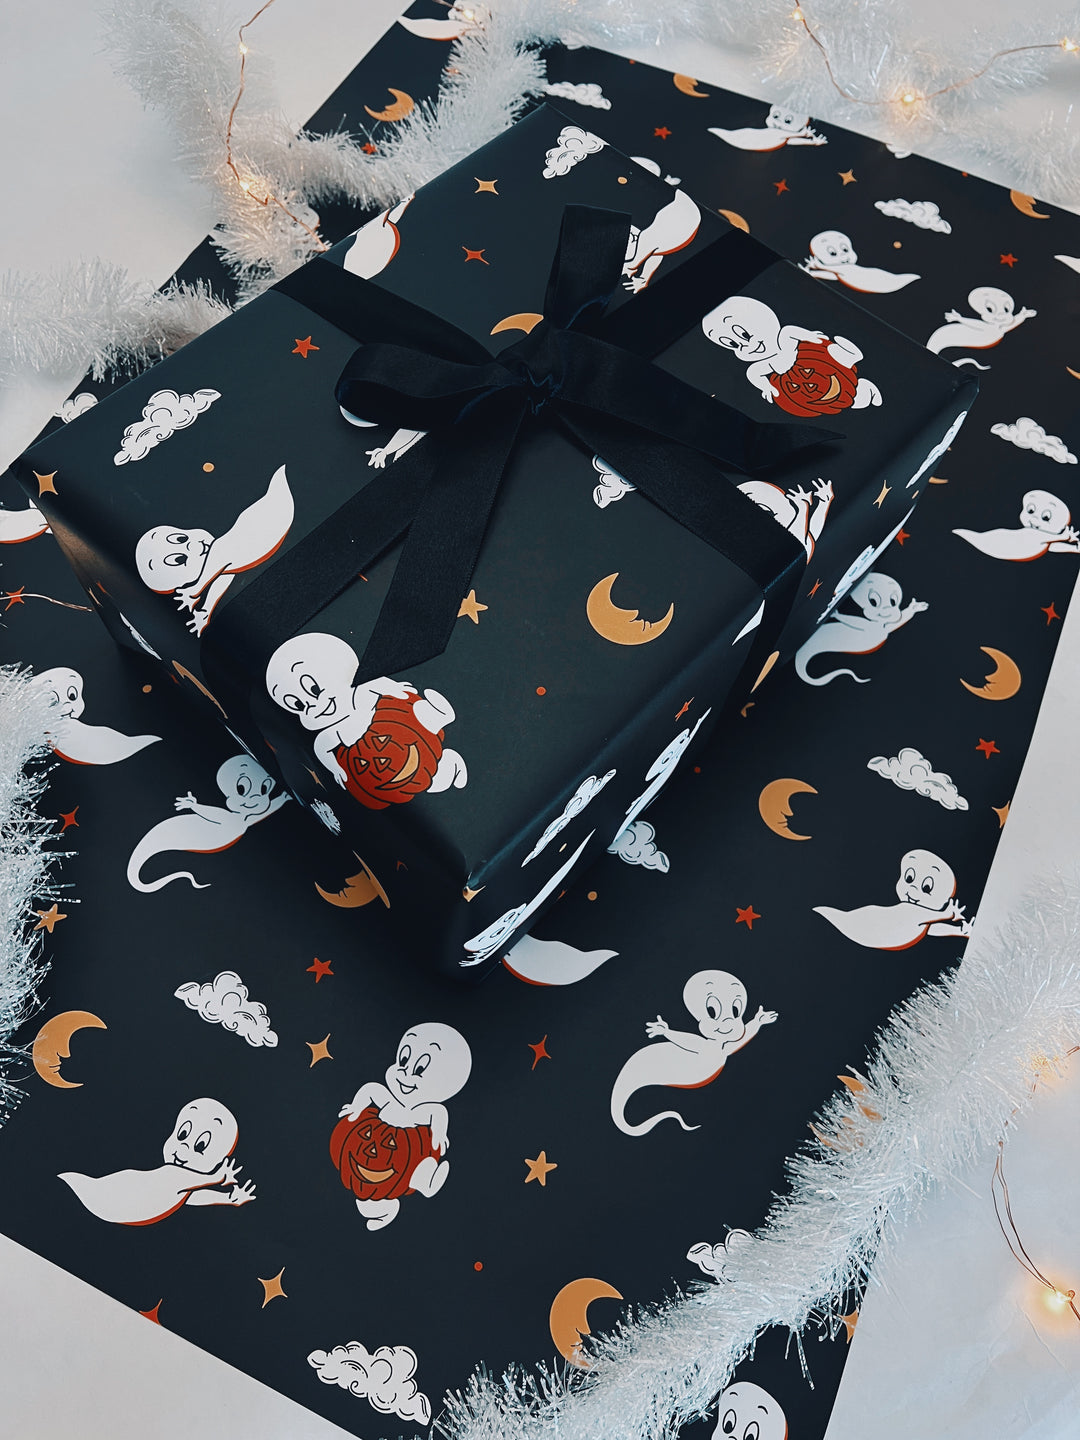 Casper Gift Wrap | Wrapping Paper